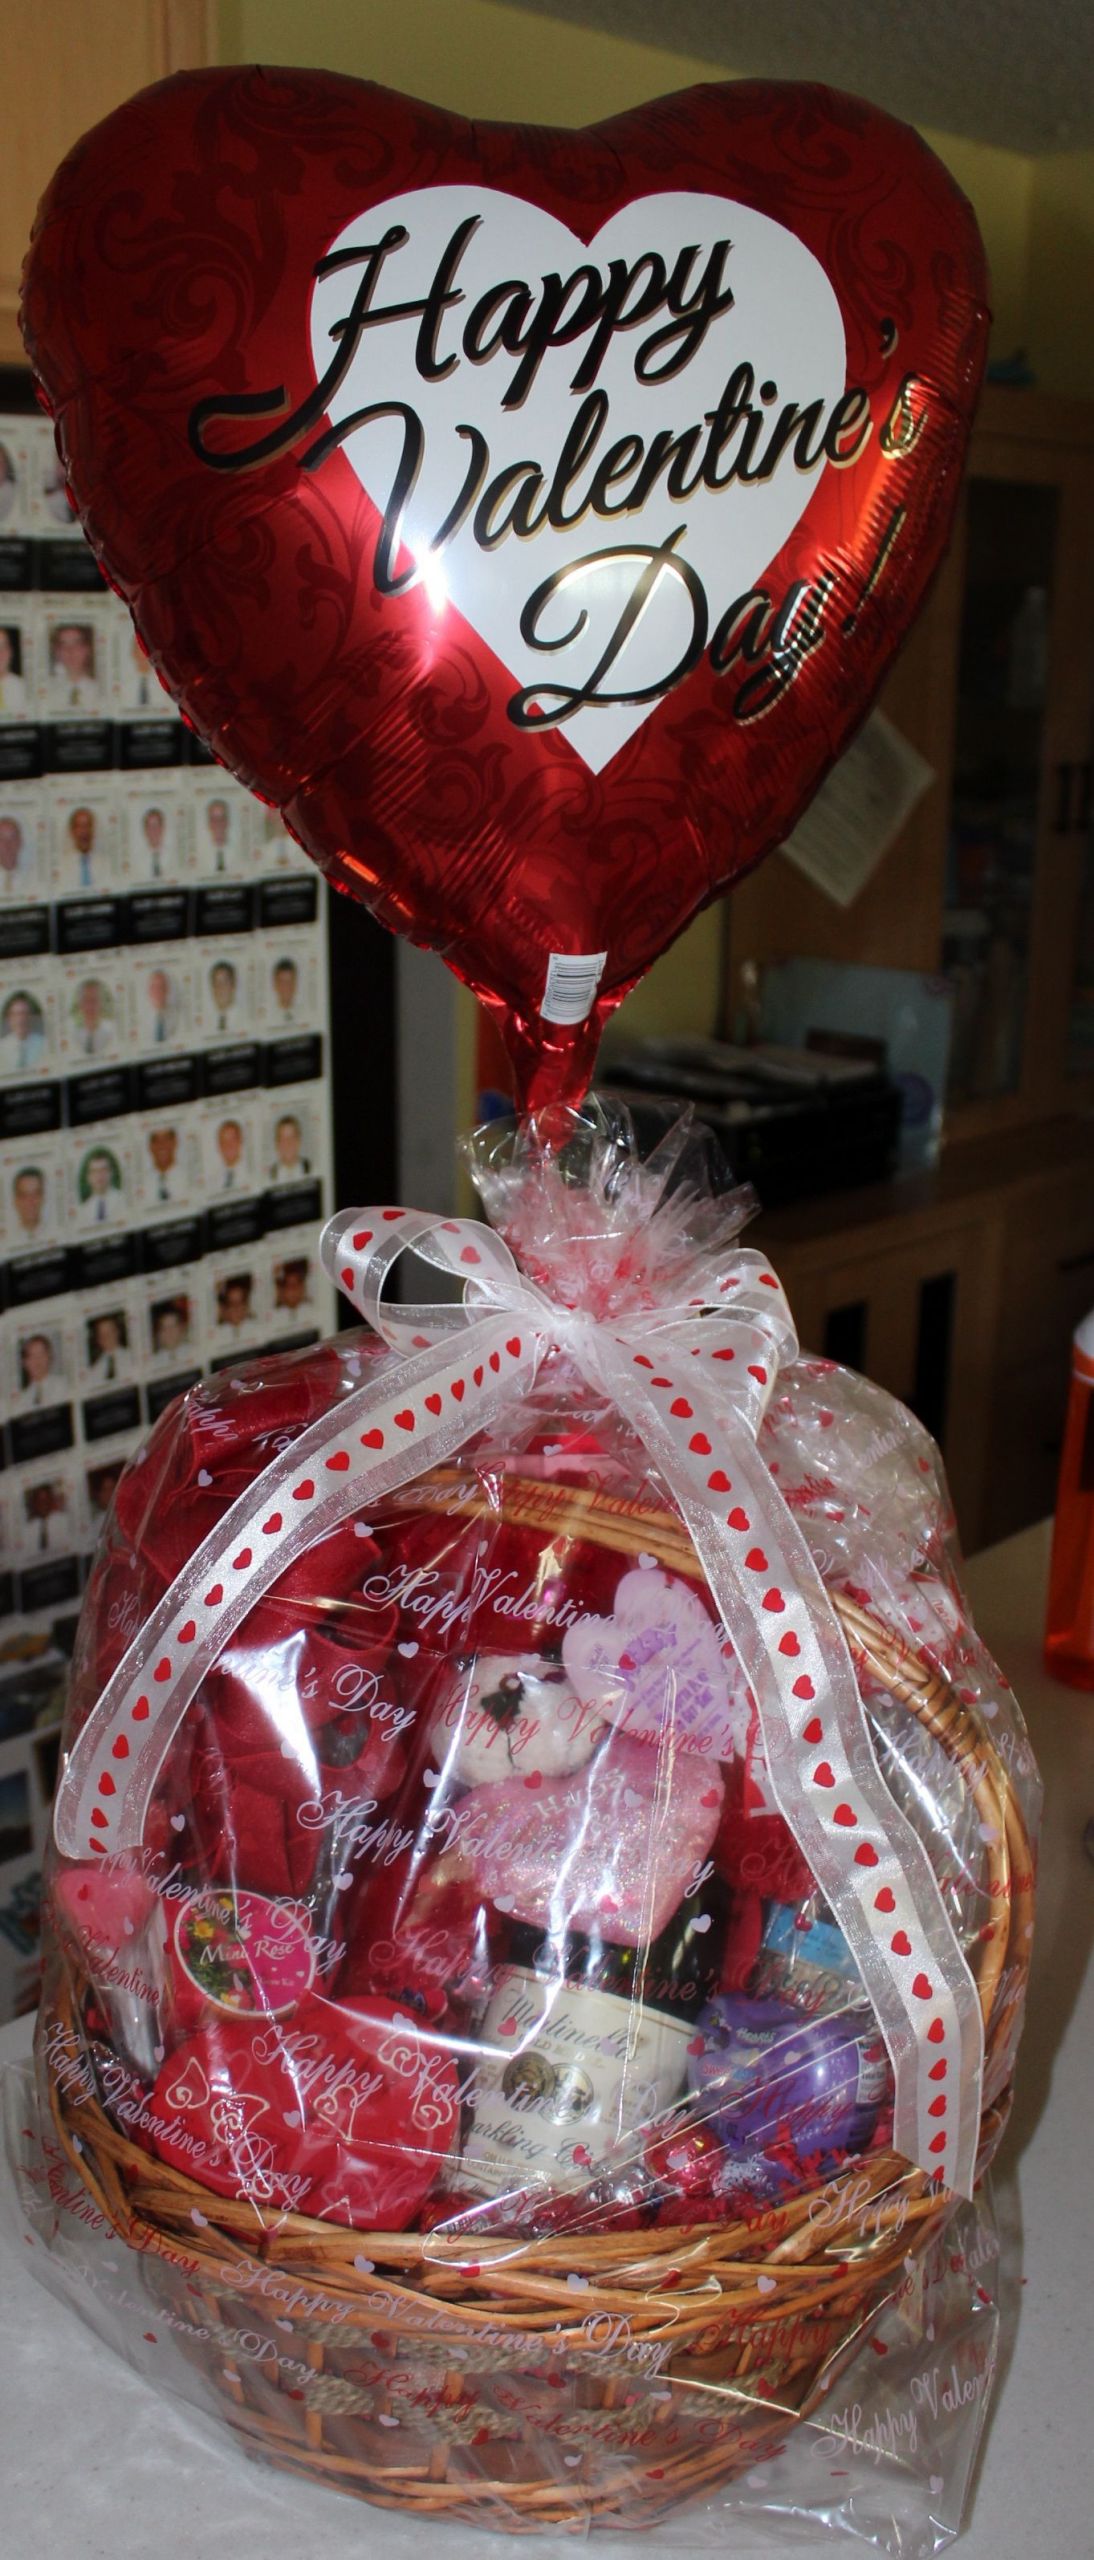 Gift Ideas For Her Valentines
 47 How To Make A Valentine Gift Basket For Her Best Idea